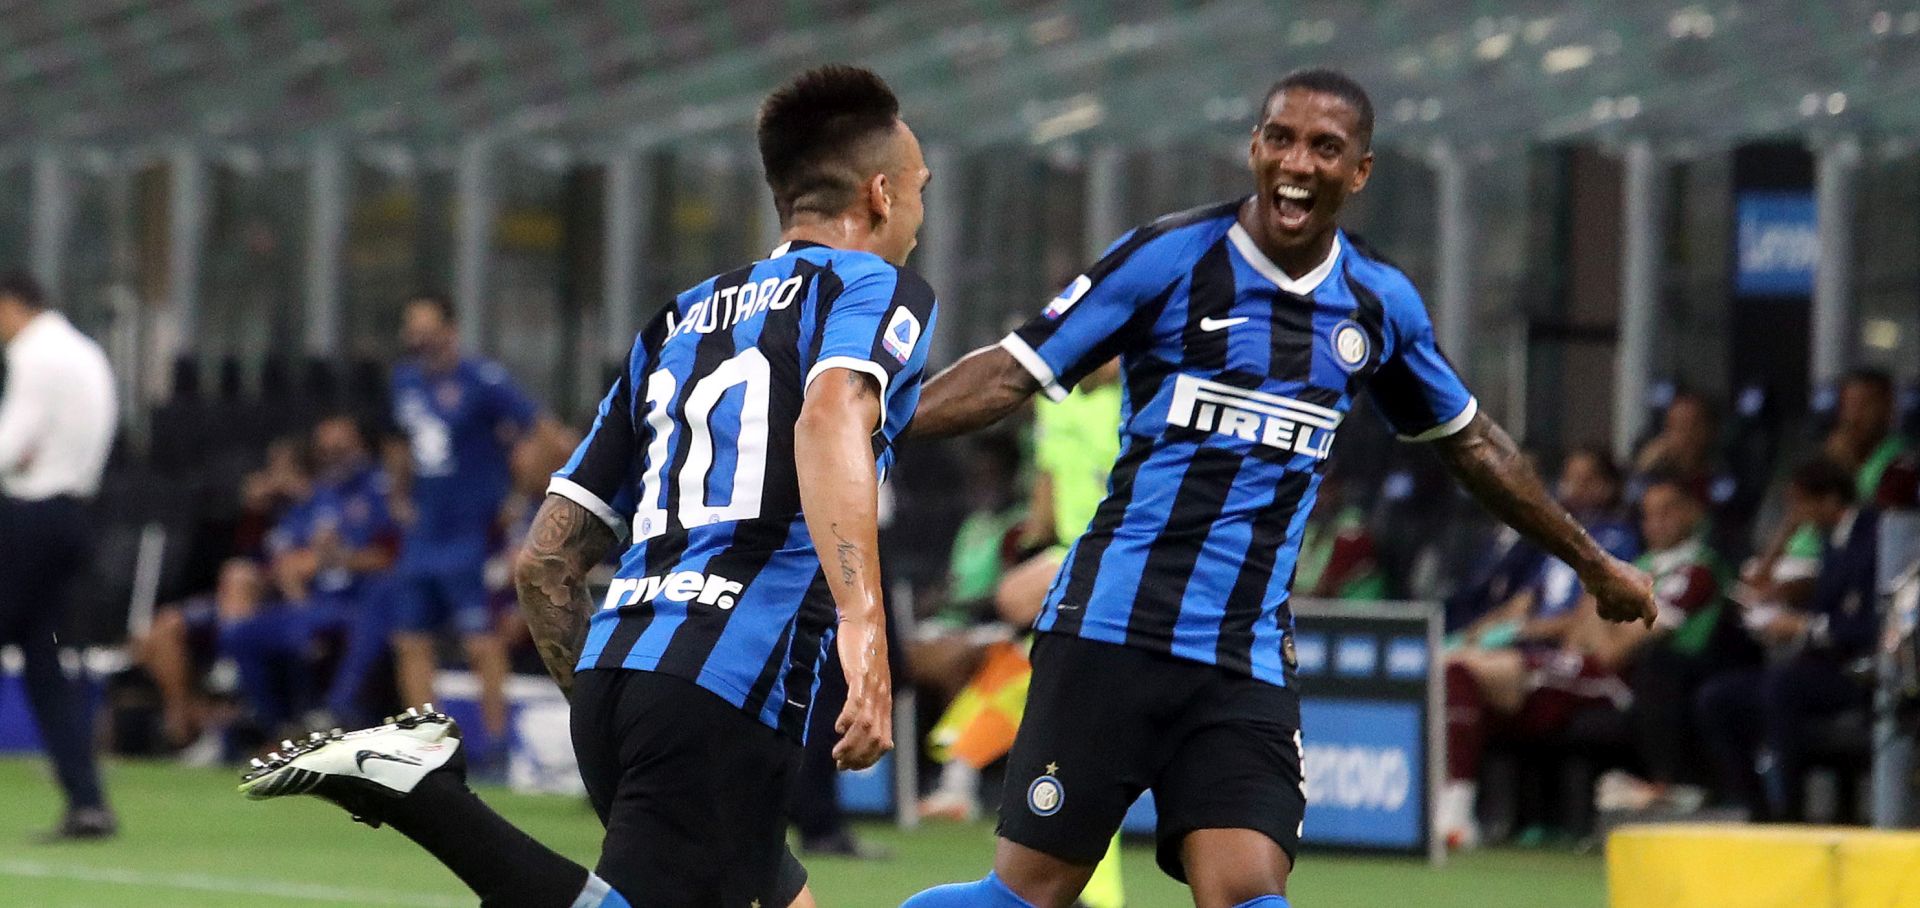 epa08544264 Inter Milan's Lautaro Martinez (L) and his teammate Ashley Young celebrate the 3-1 goal  during the Italian Serie A soccer match between Inter Milan and Torino FC at Giuseppe Meazza stadium in Milan, Italy, 13 July 2020.  EPA/MATTEO BAZZI